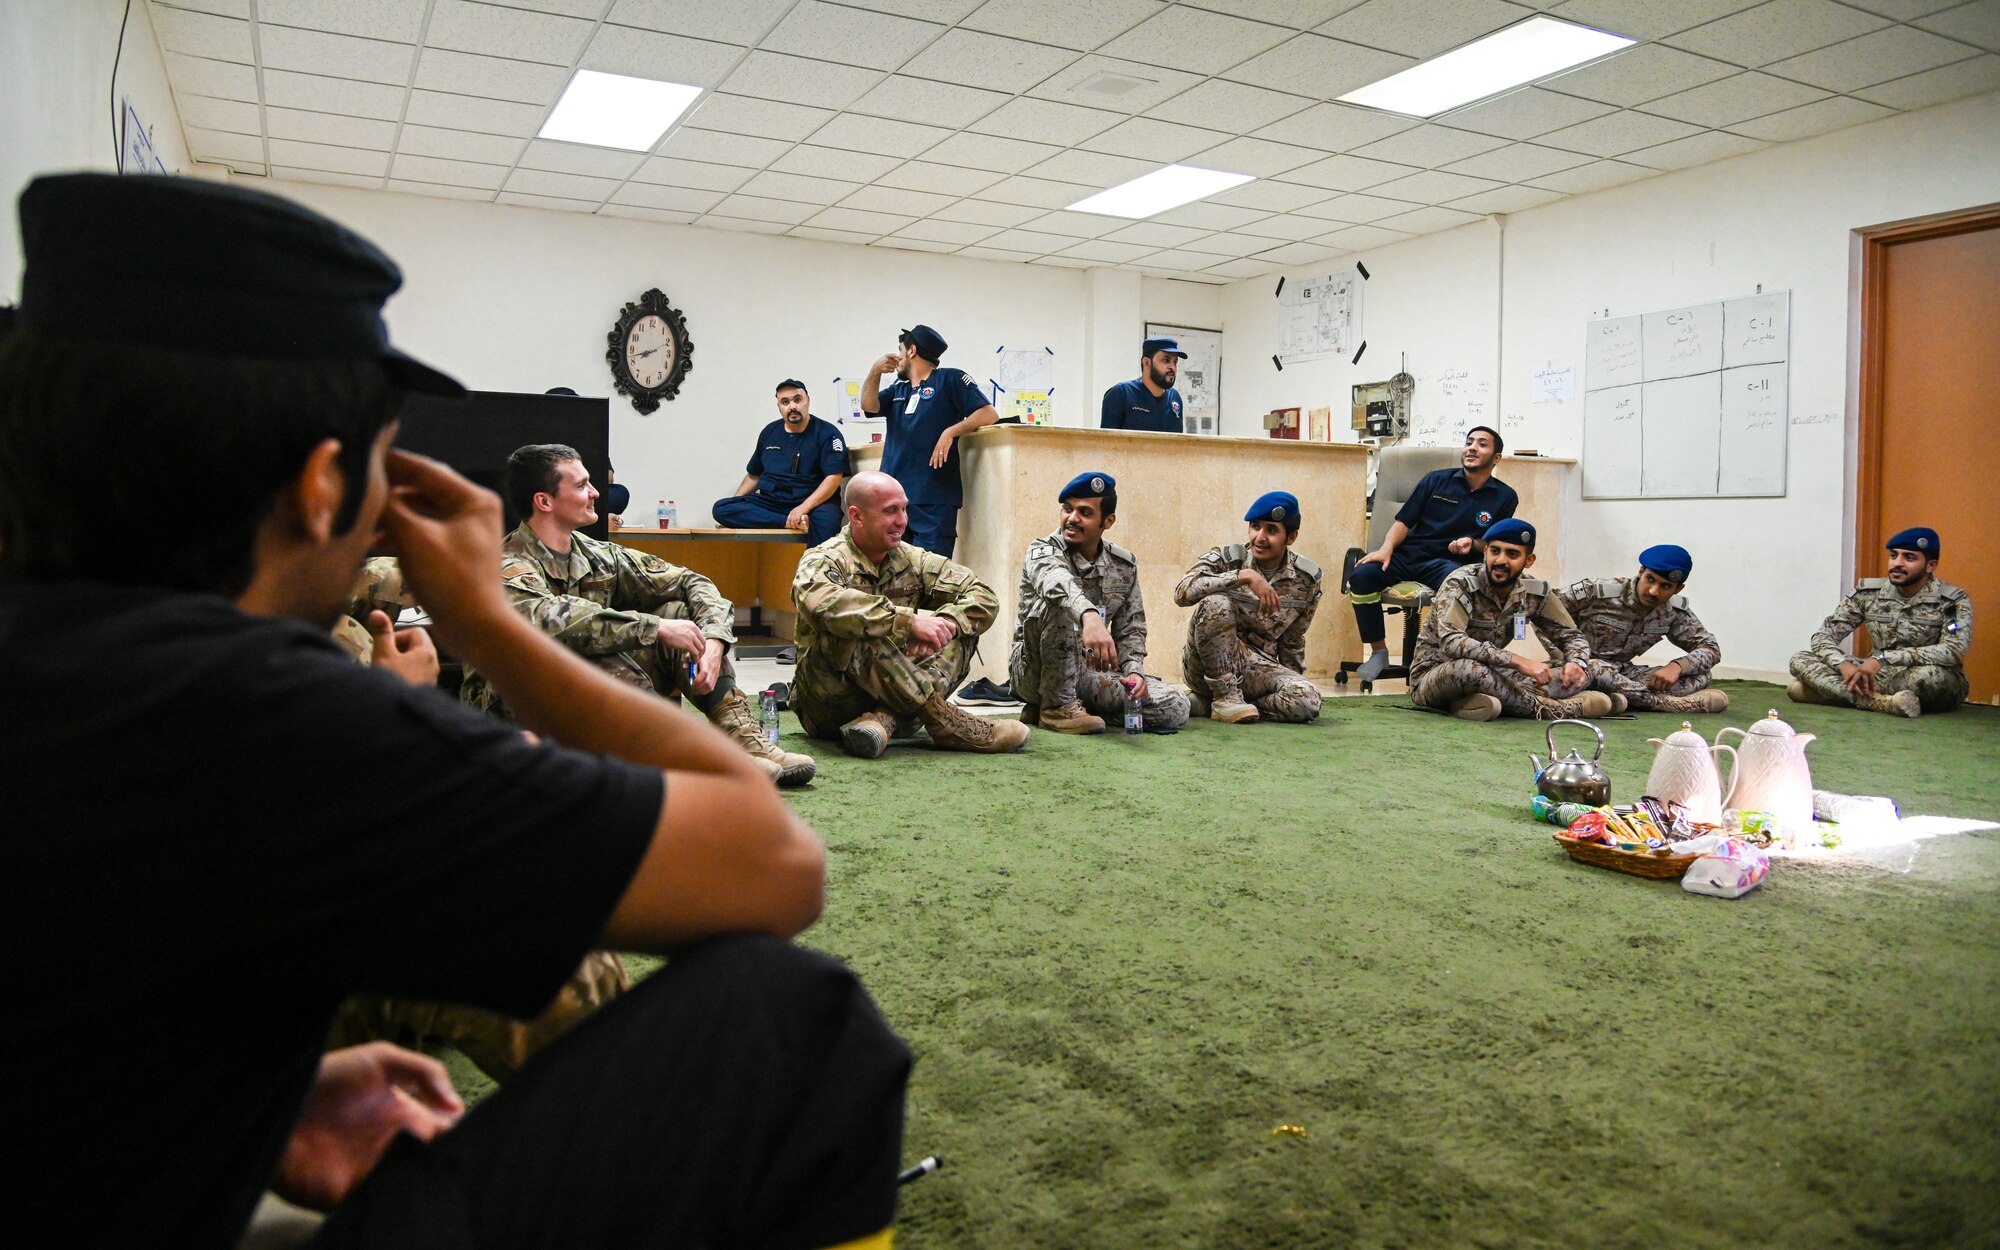 Airmen from the 378th Expeditionary Civil Engineer Squadron fire department laugh alongside service members from the Royal Saudi Air Force while sharing tea during an integrated training at Prince Sultan Air Base, Kingdom of Saudi Arabia, Nov. 24, 2021. The act of sharing tea is a staple of hospitality in Saudi culture and allows both teams the opportunity to bond in a more informal and welcoming environment. (U.S. Air Force photo by Staff Sgt. Christina Graves)